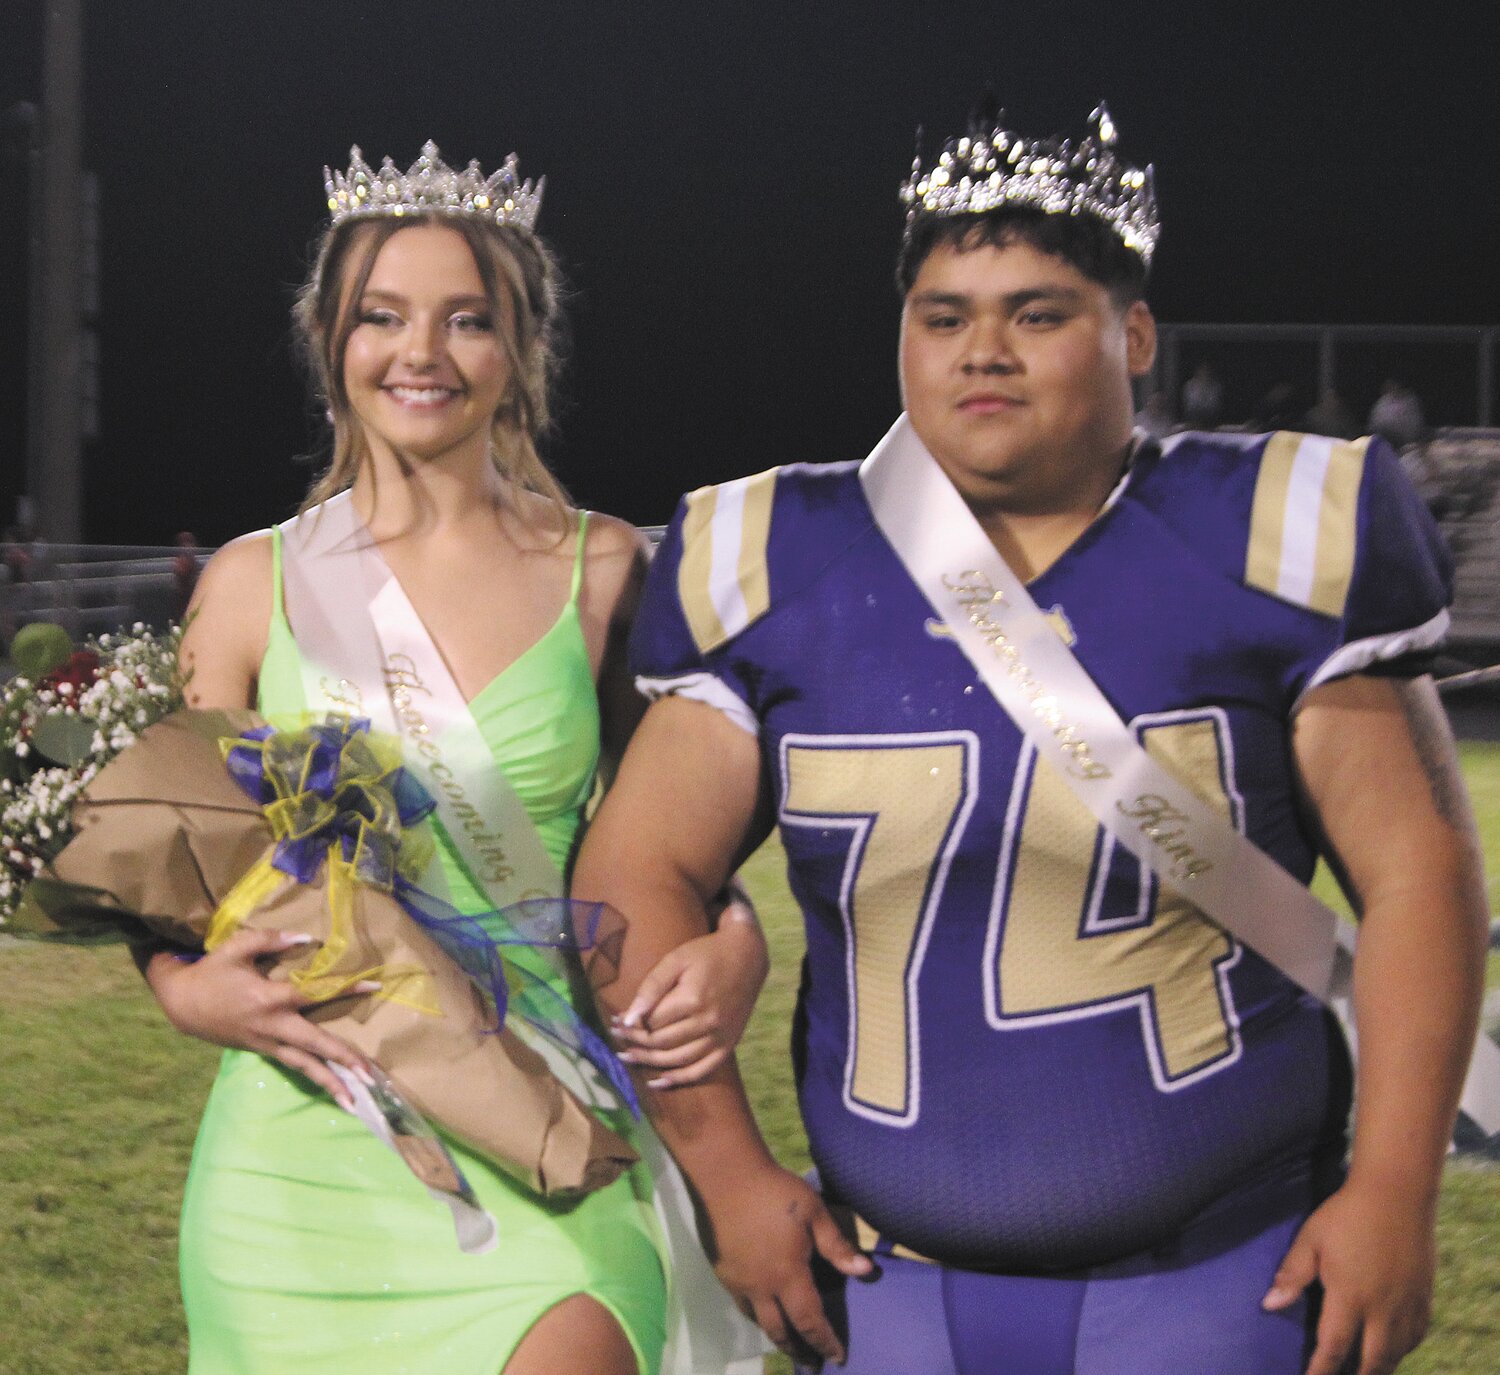 Morgan Brown and Julio "Dozer" Mendoza were crowned Homecoming Queen and King on Friday at Fountain Central High School.